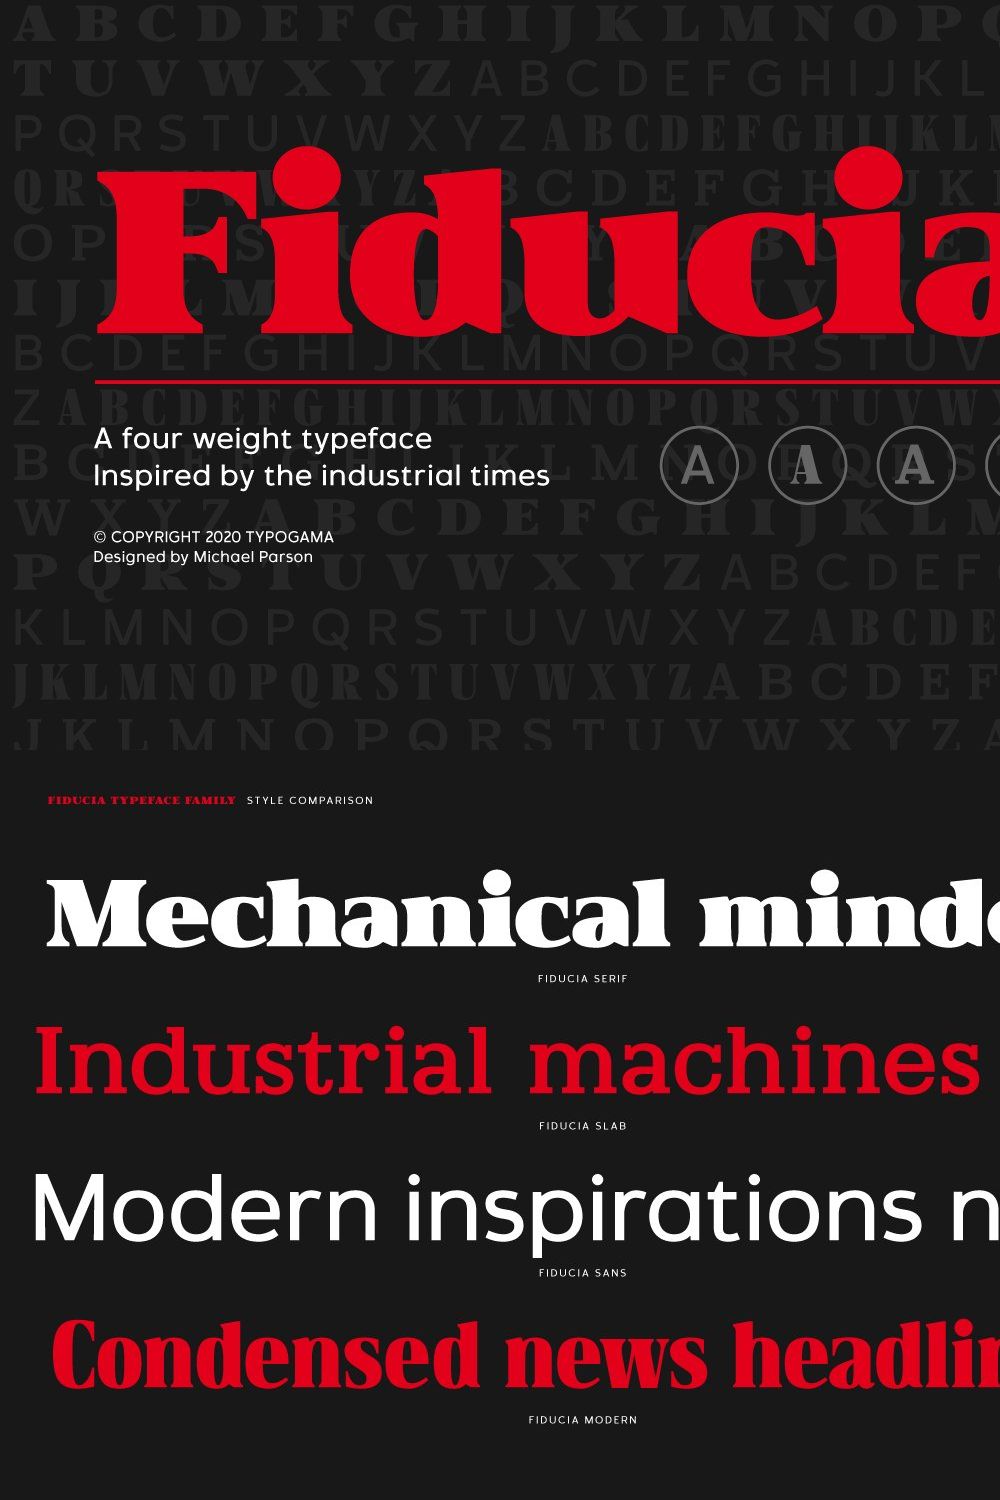 Fiducia pinterest preview image.